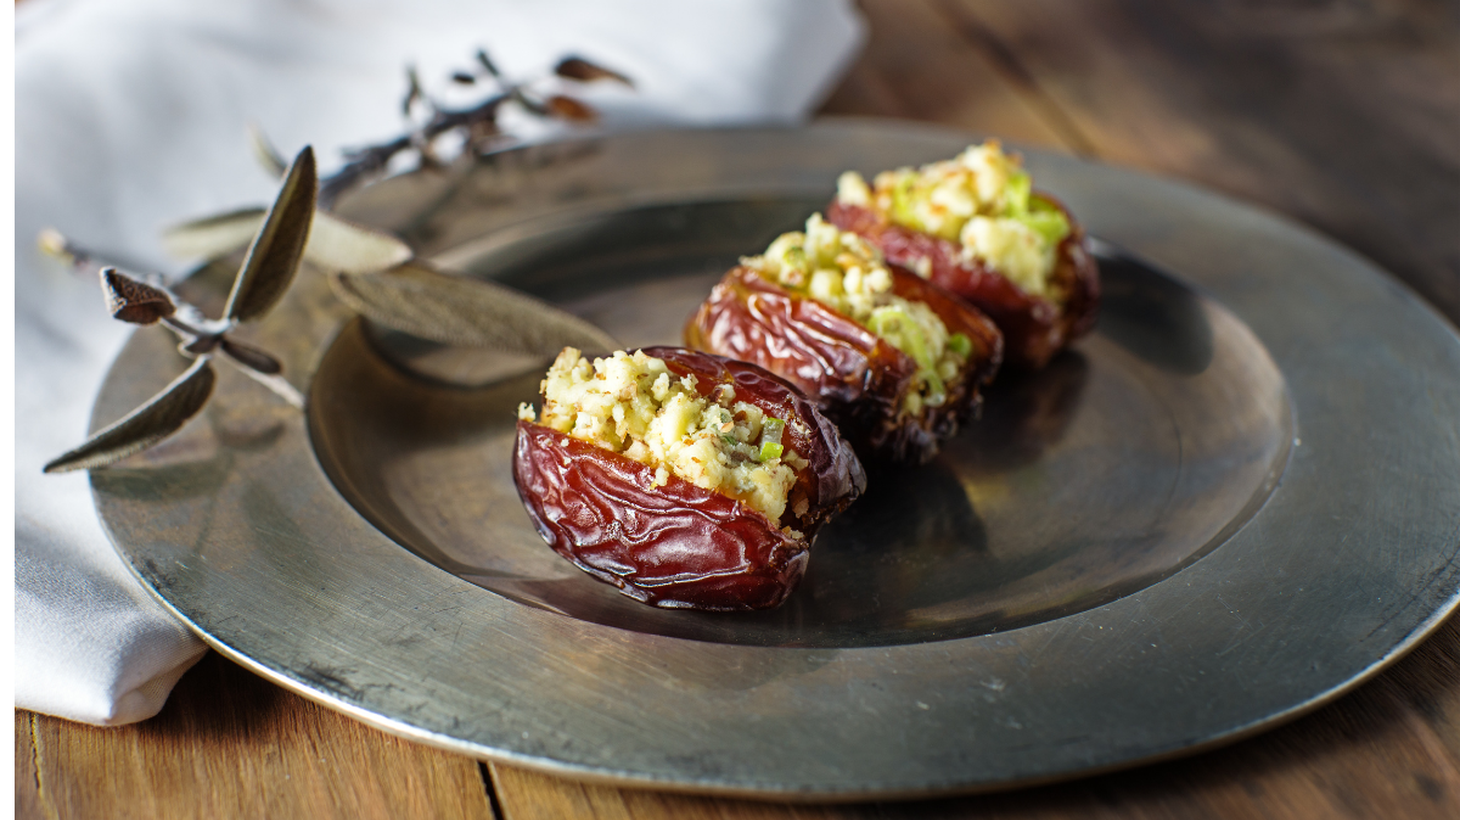 Dates filled with goat cheese are an easy appetizer for the spring holidays.